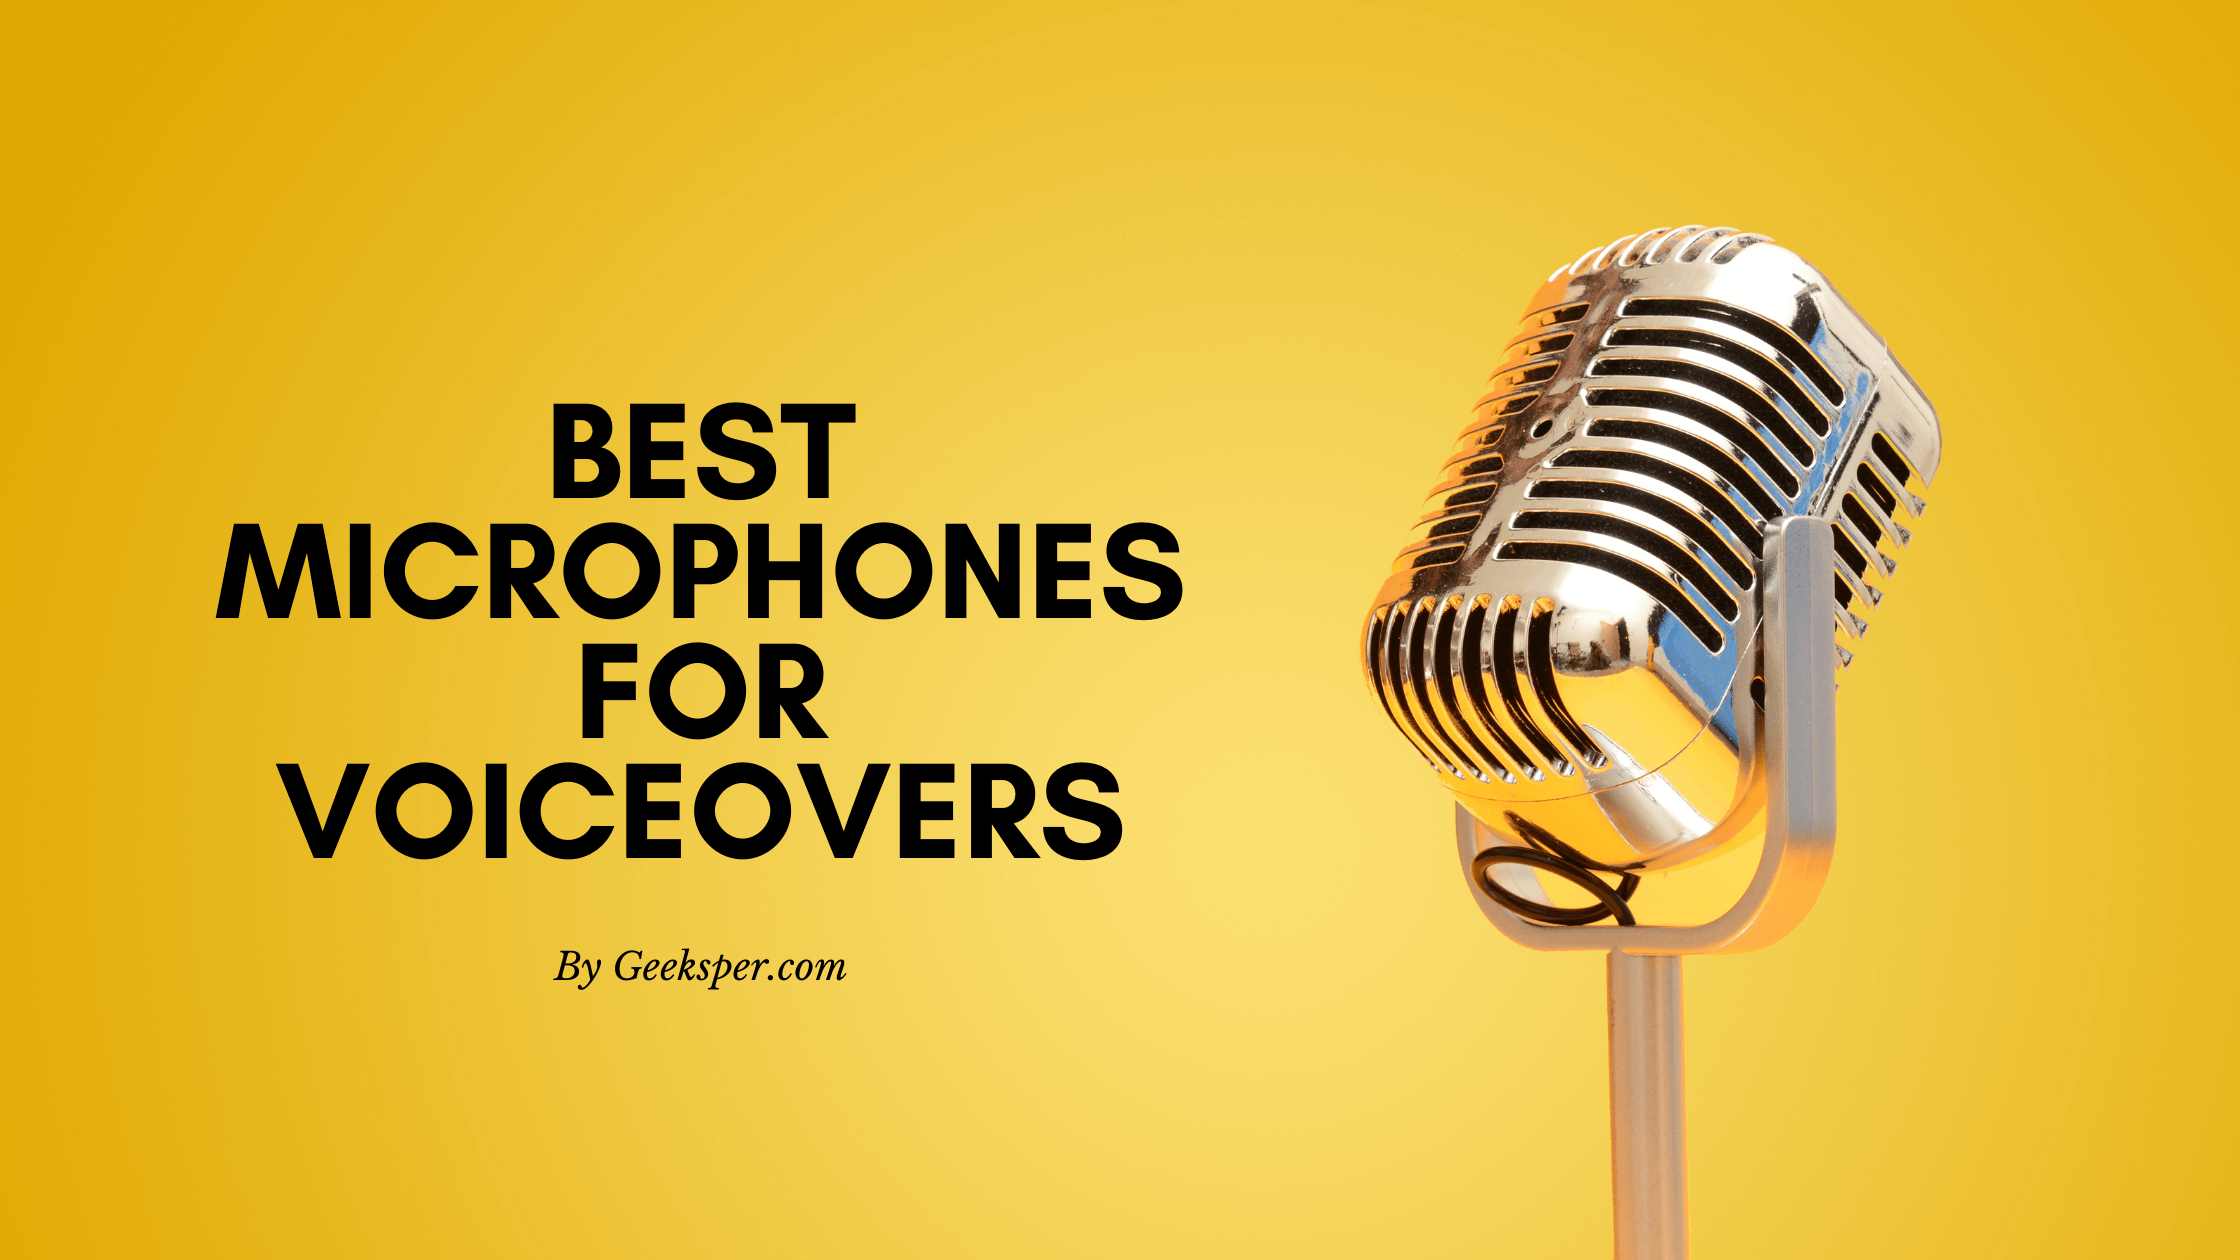 Best Microphones For Voiceovers